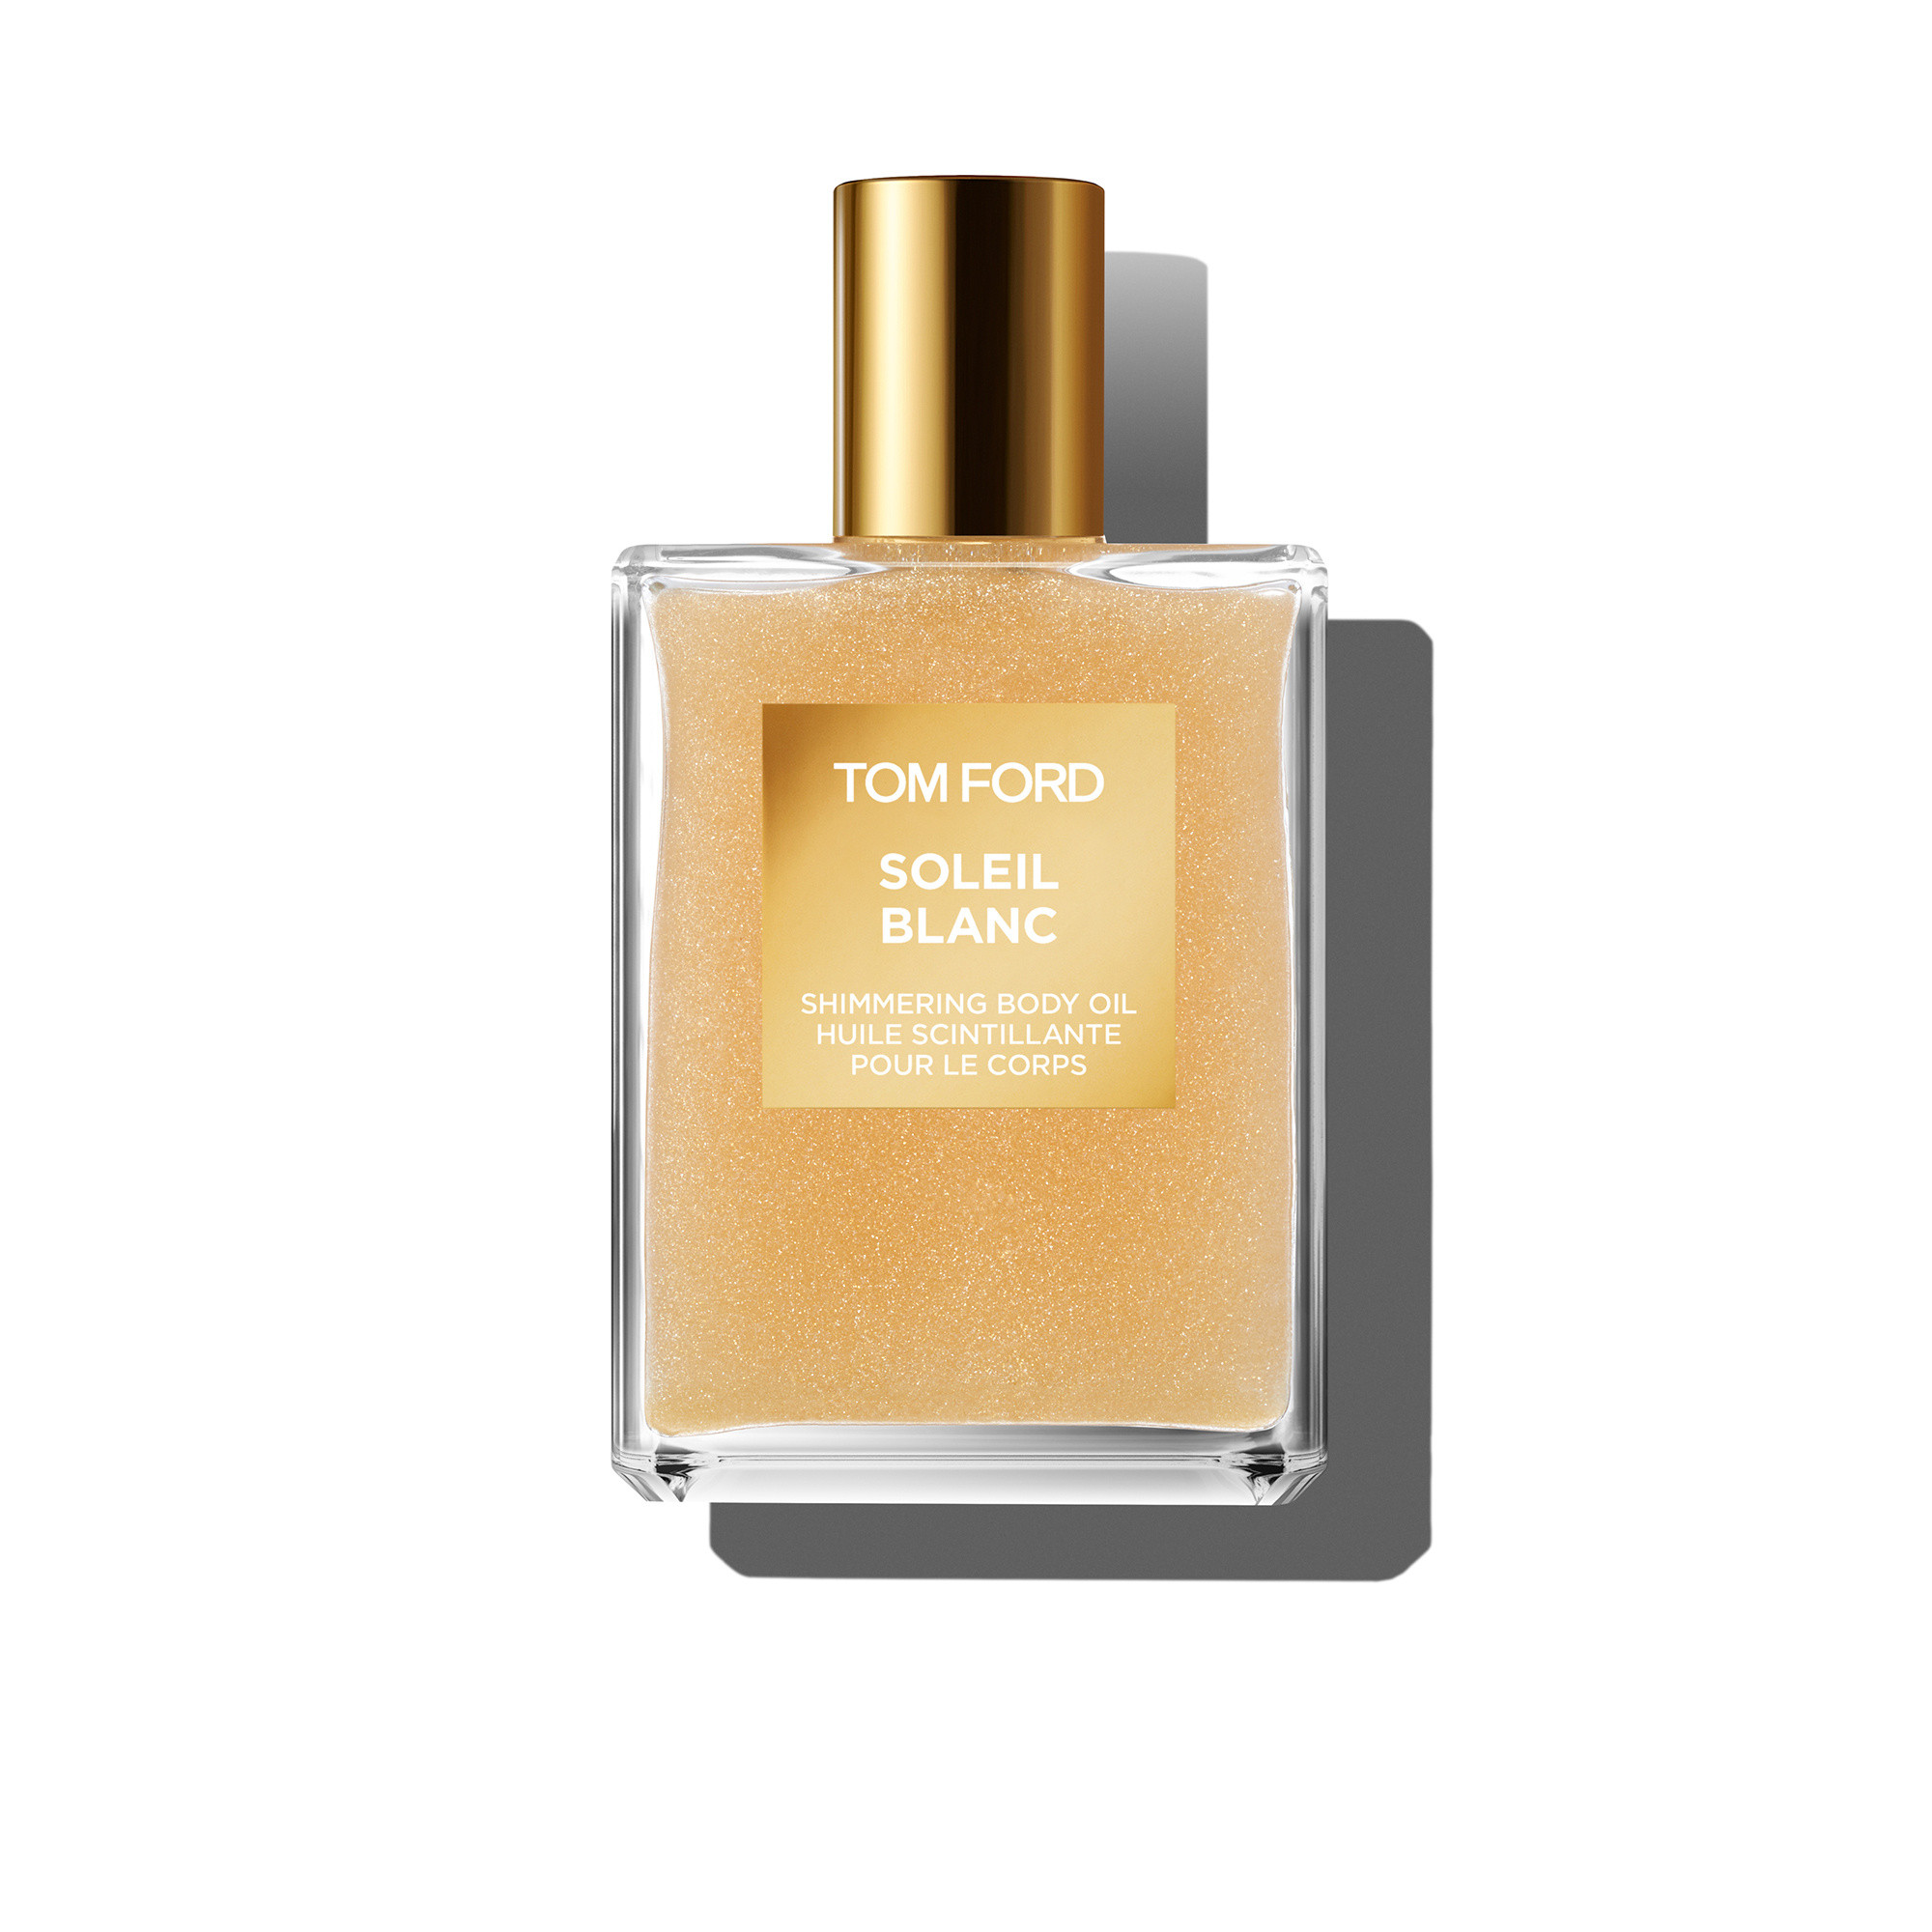 Tom Ford Beauty - Soleil Blanc Shimmering Body Oil 100 ml, Golden Yellow, large image number 0